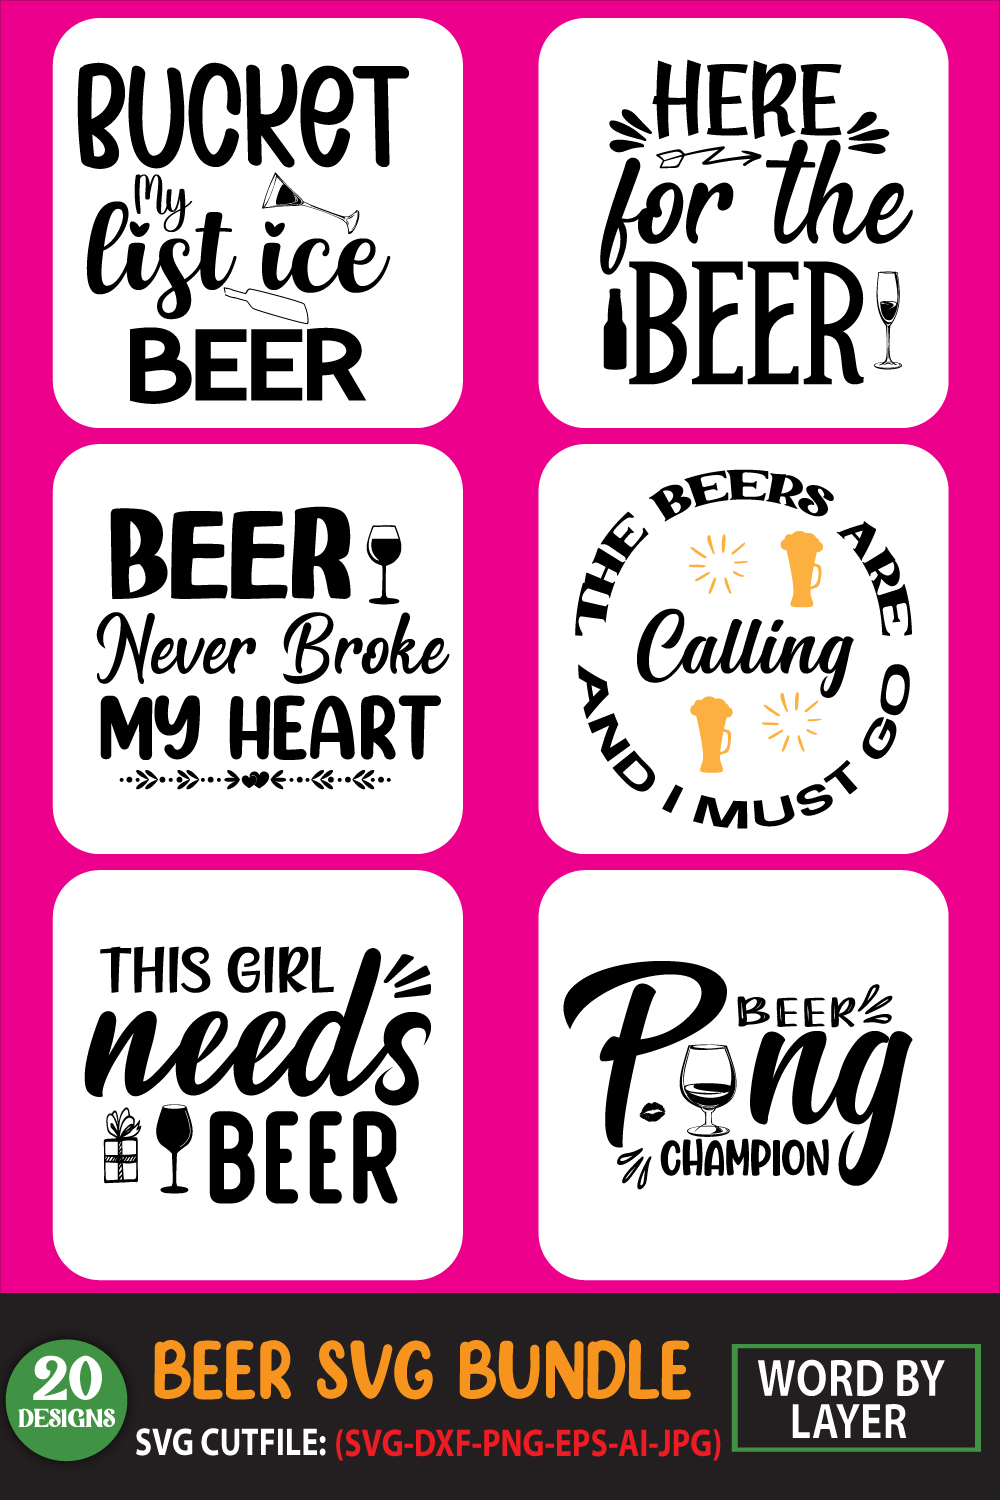 A selection of gorgeous images for prints on the theme of beer